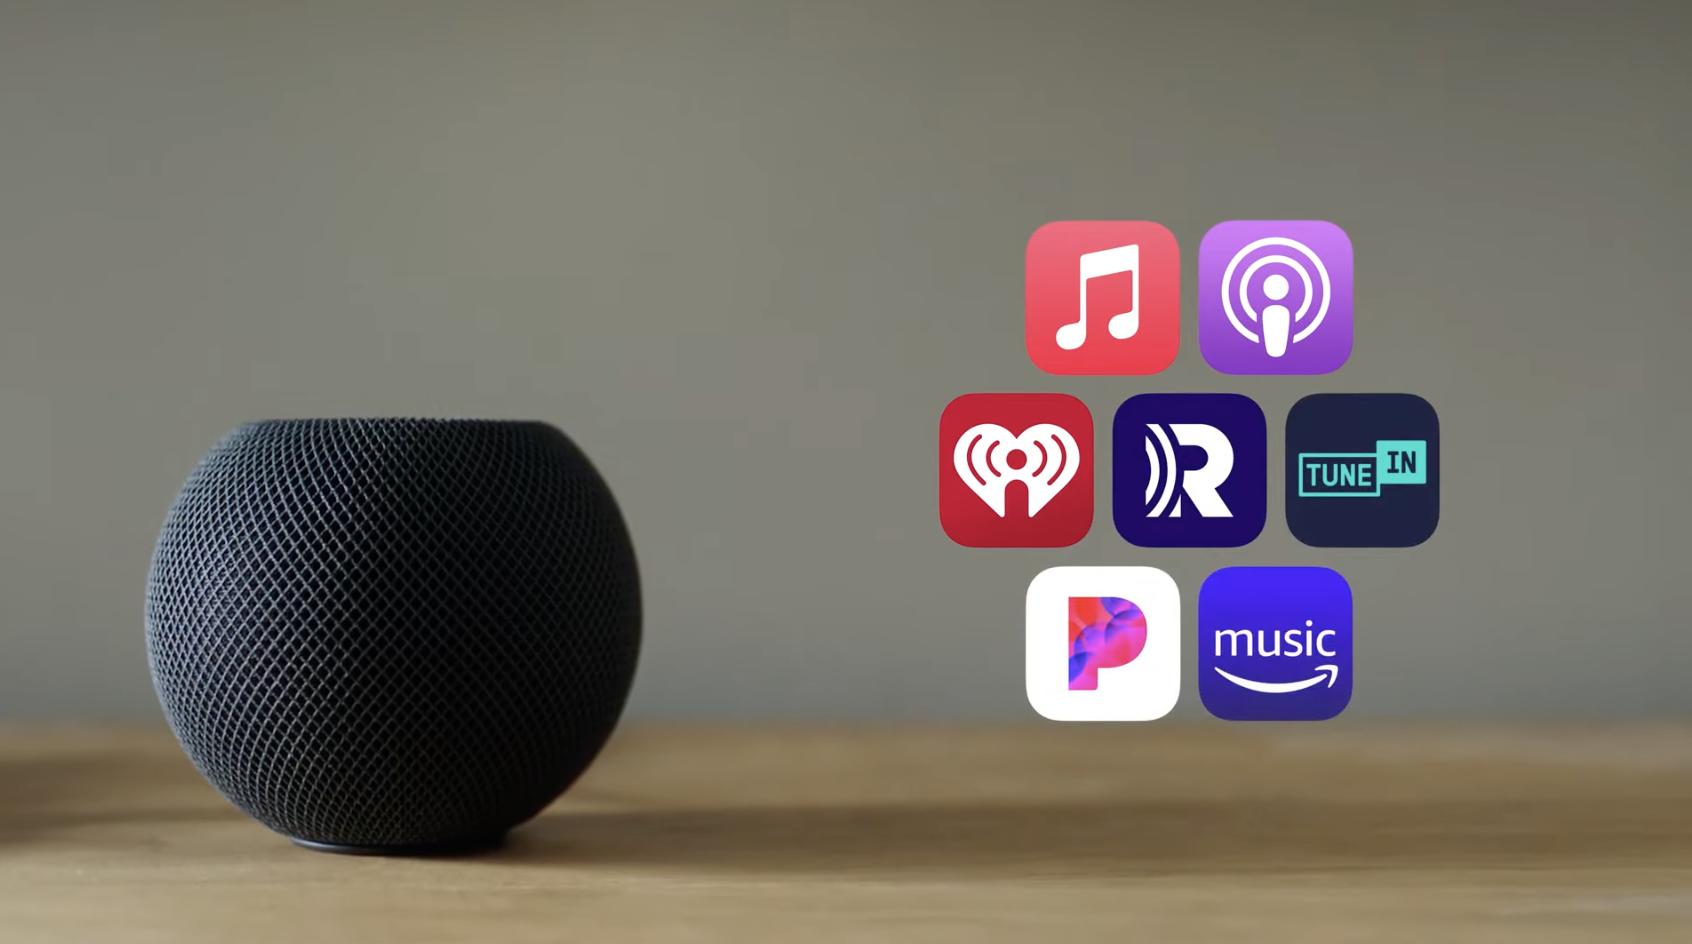 Homepod Mini Supported Services